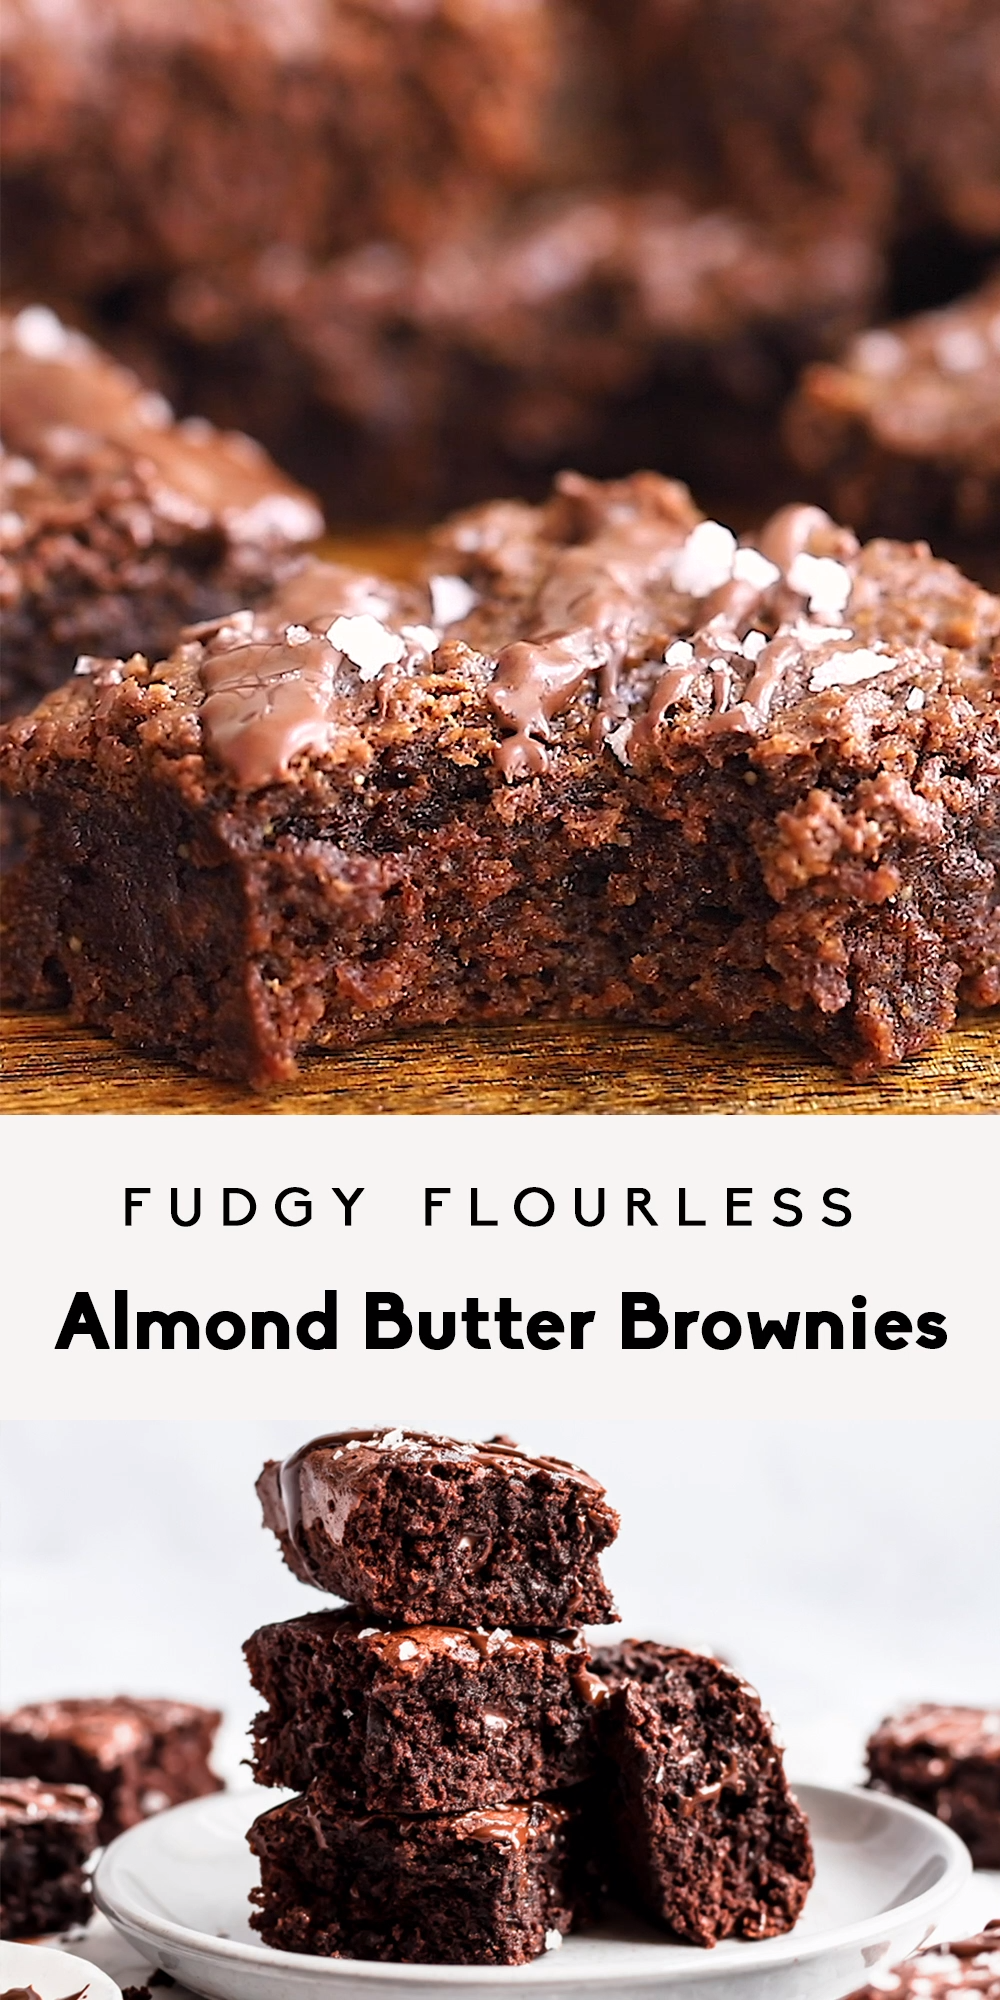 Fudgy Flourless Almond Butter Brownies (gluten free + dairy free) -   18 healthy recipes Simple maple syrup ideas